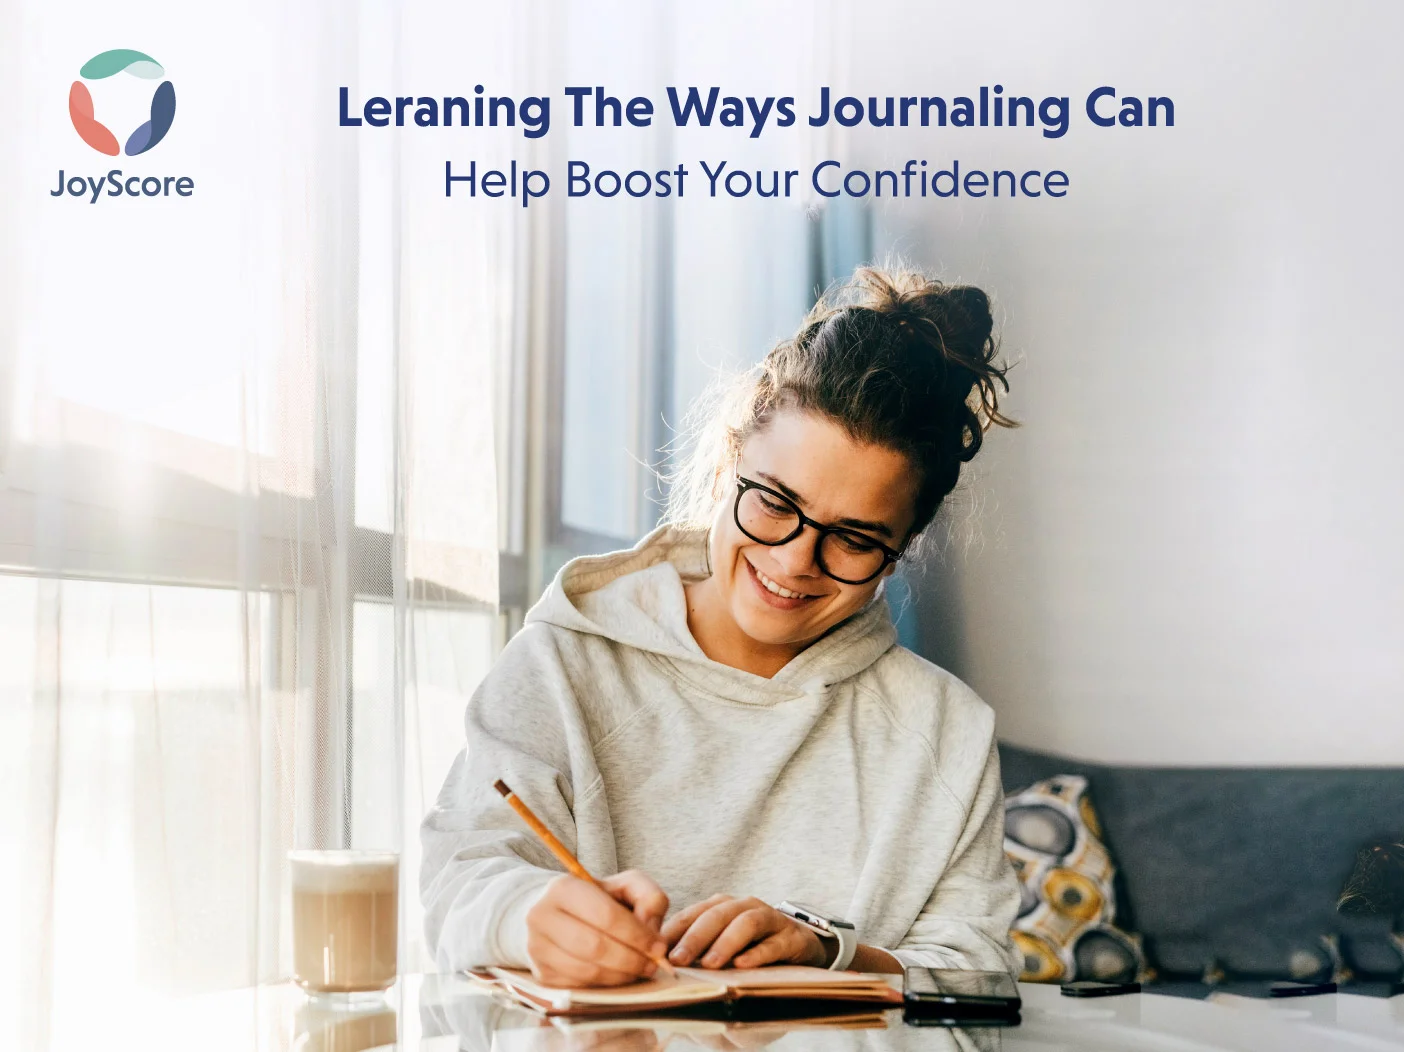 How Journaling Can Help Boost Your Confidence